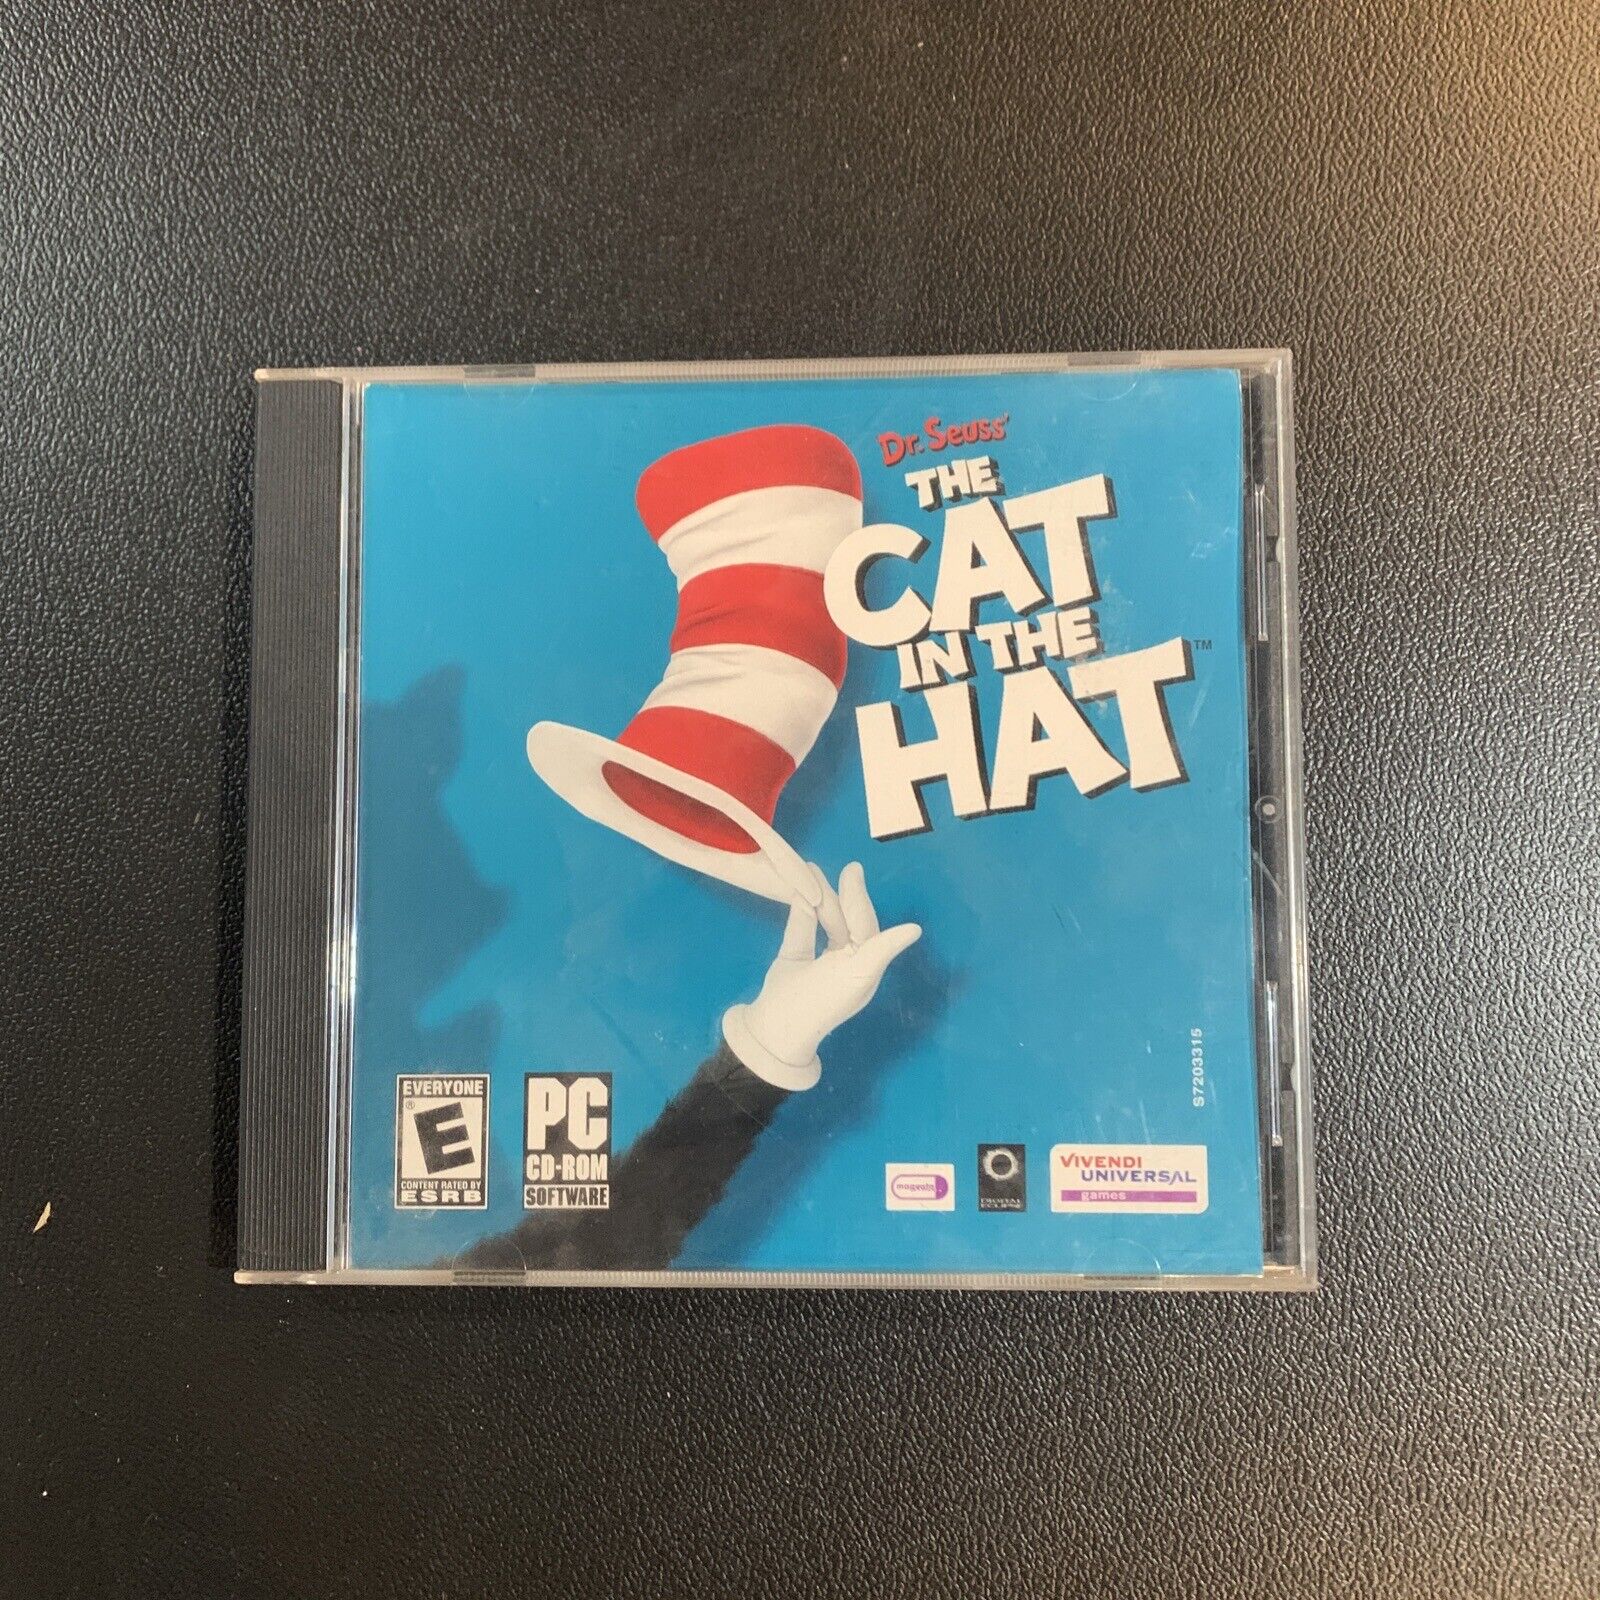 Dr. Seuss The Cat in the Hat - Windows PC CD-ROM Game, 2003, Tested Fast Ship